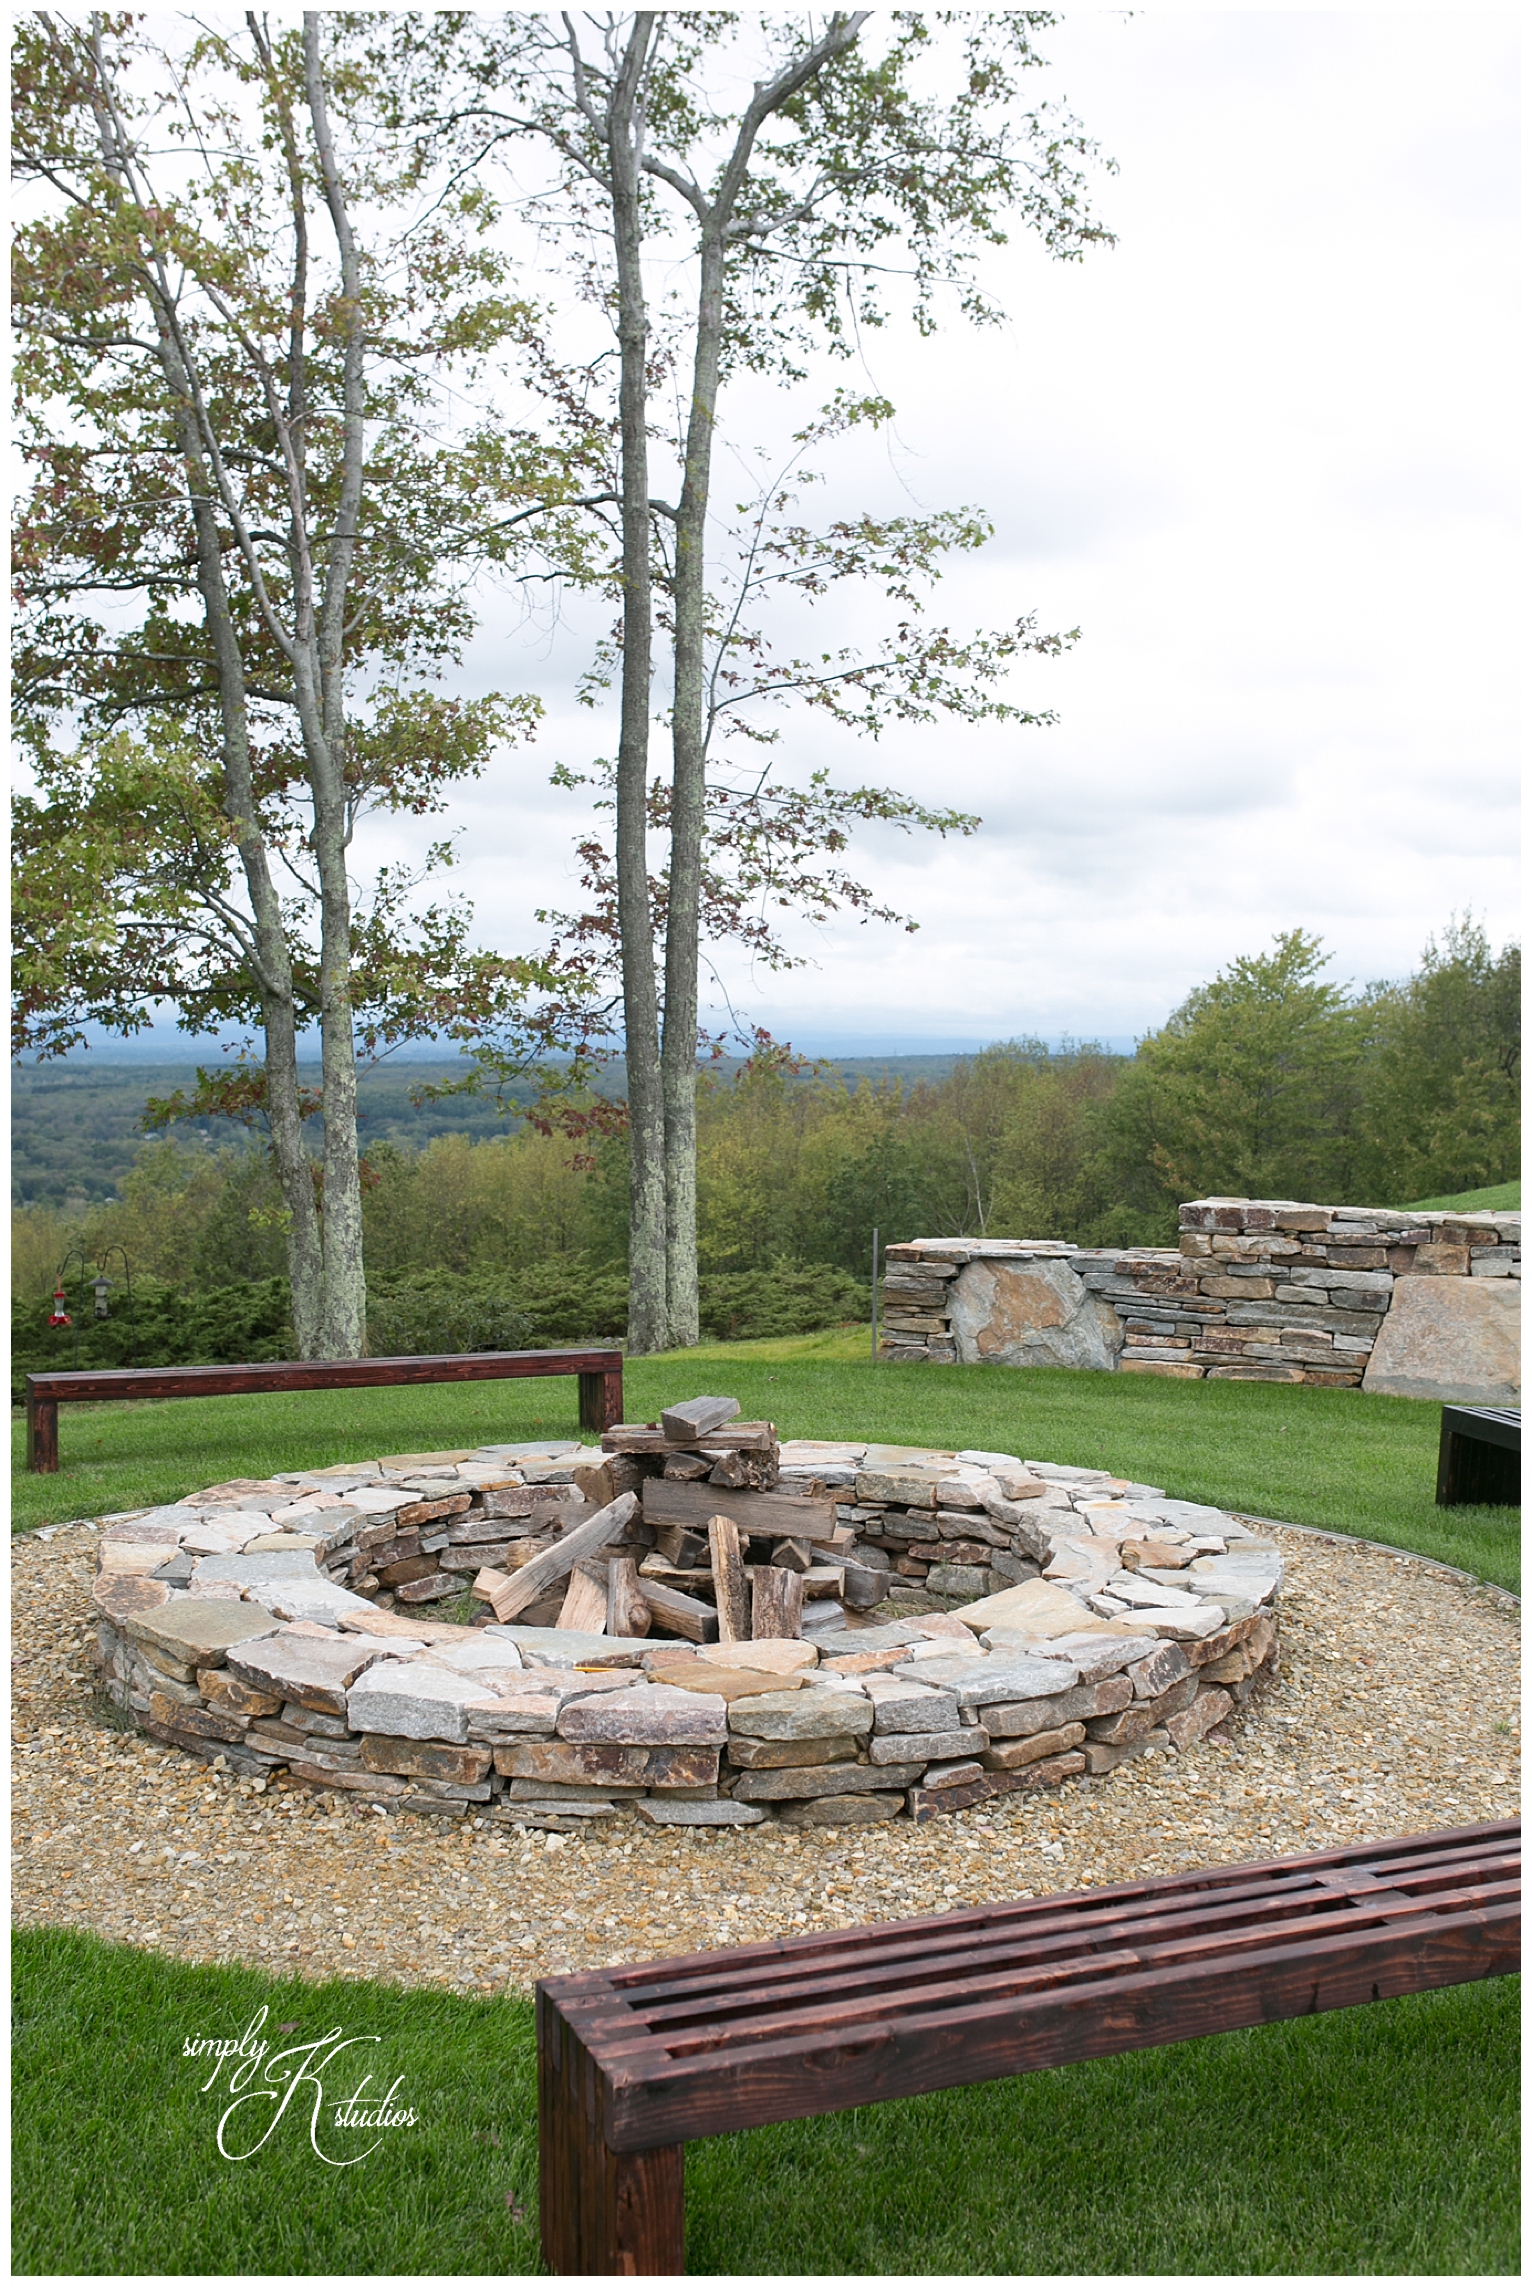 Fire Pit at a Wedding in CT.jpg